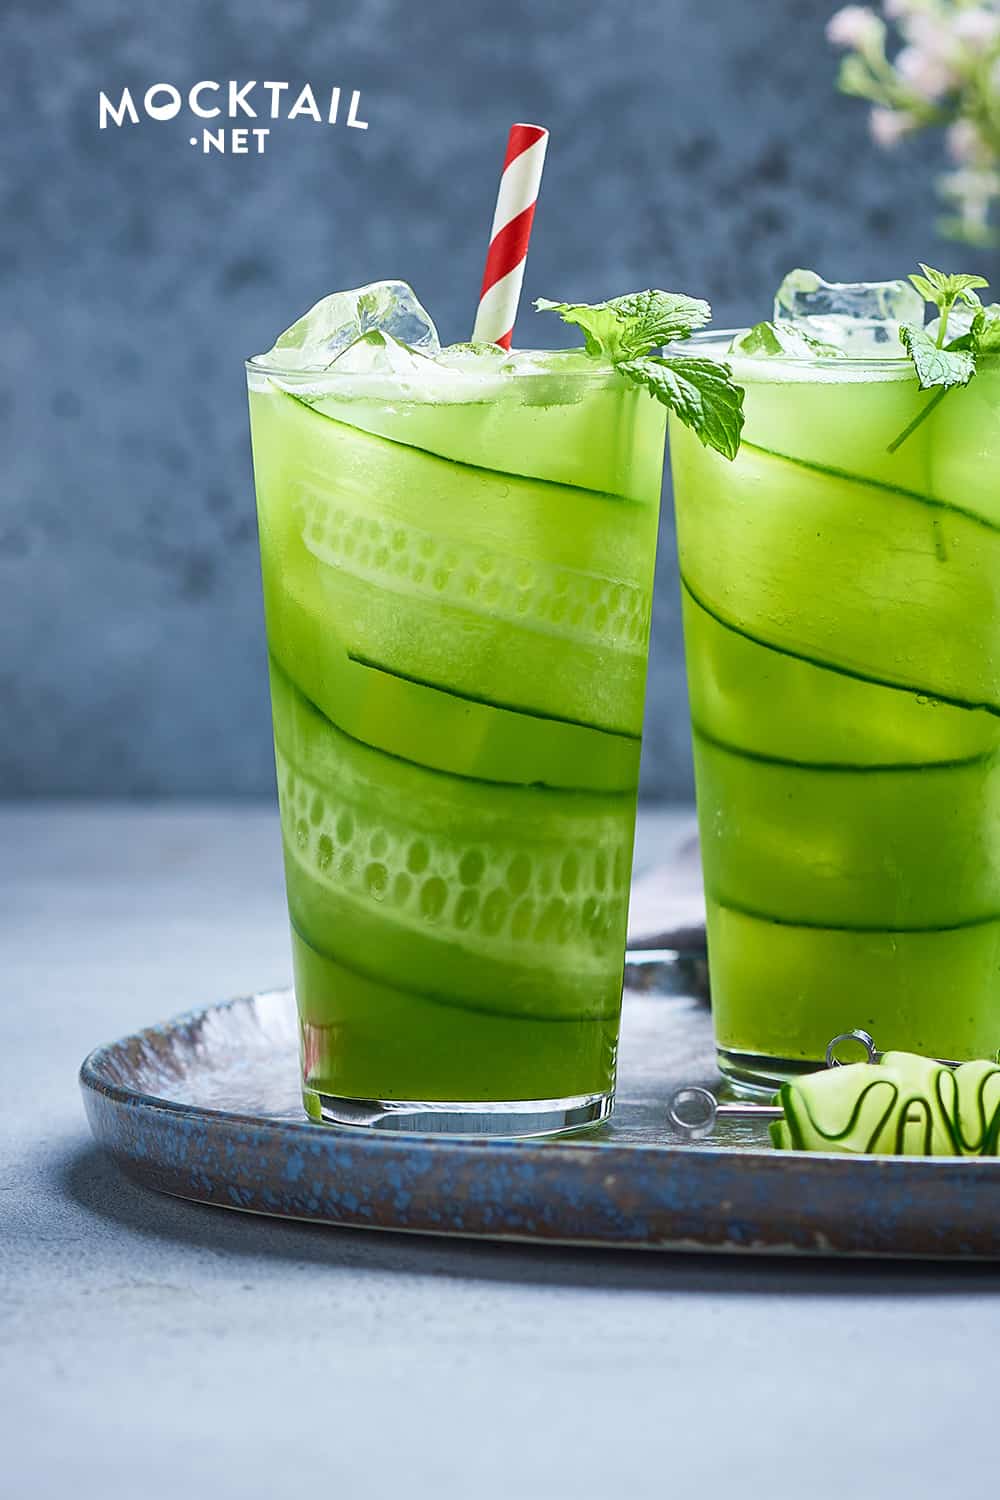 How to Make a Cucumber Mocktail